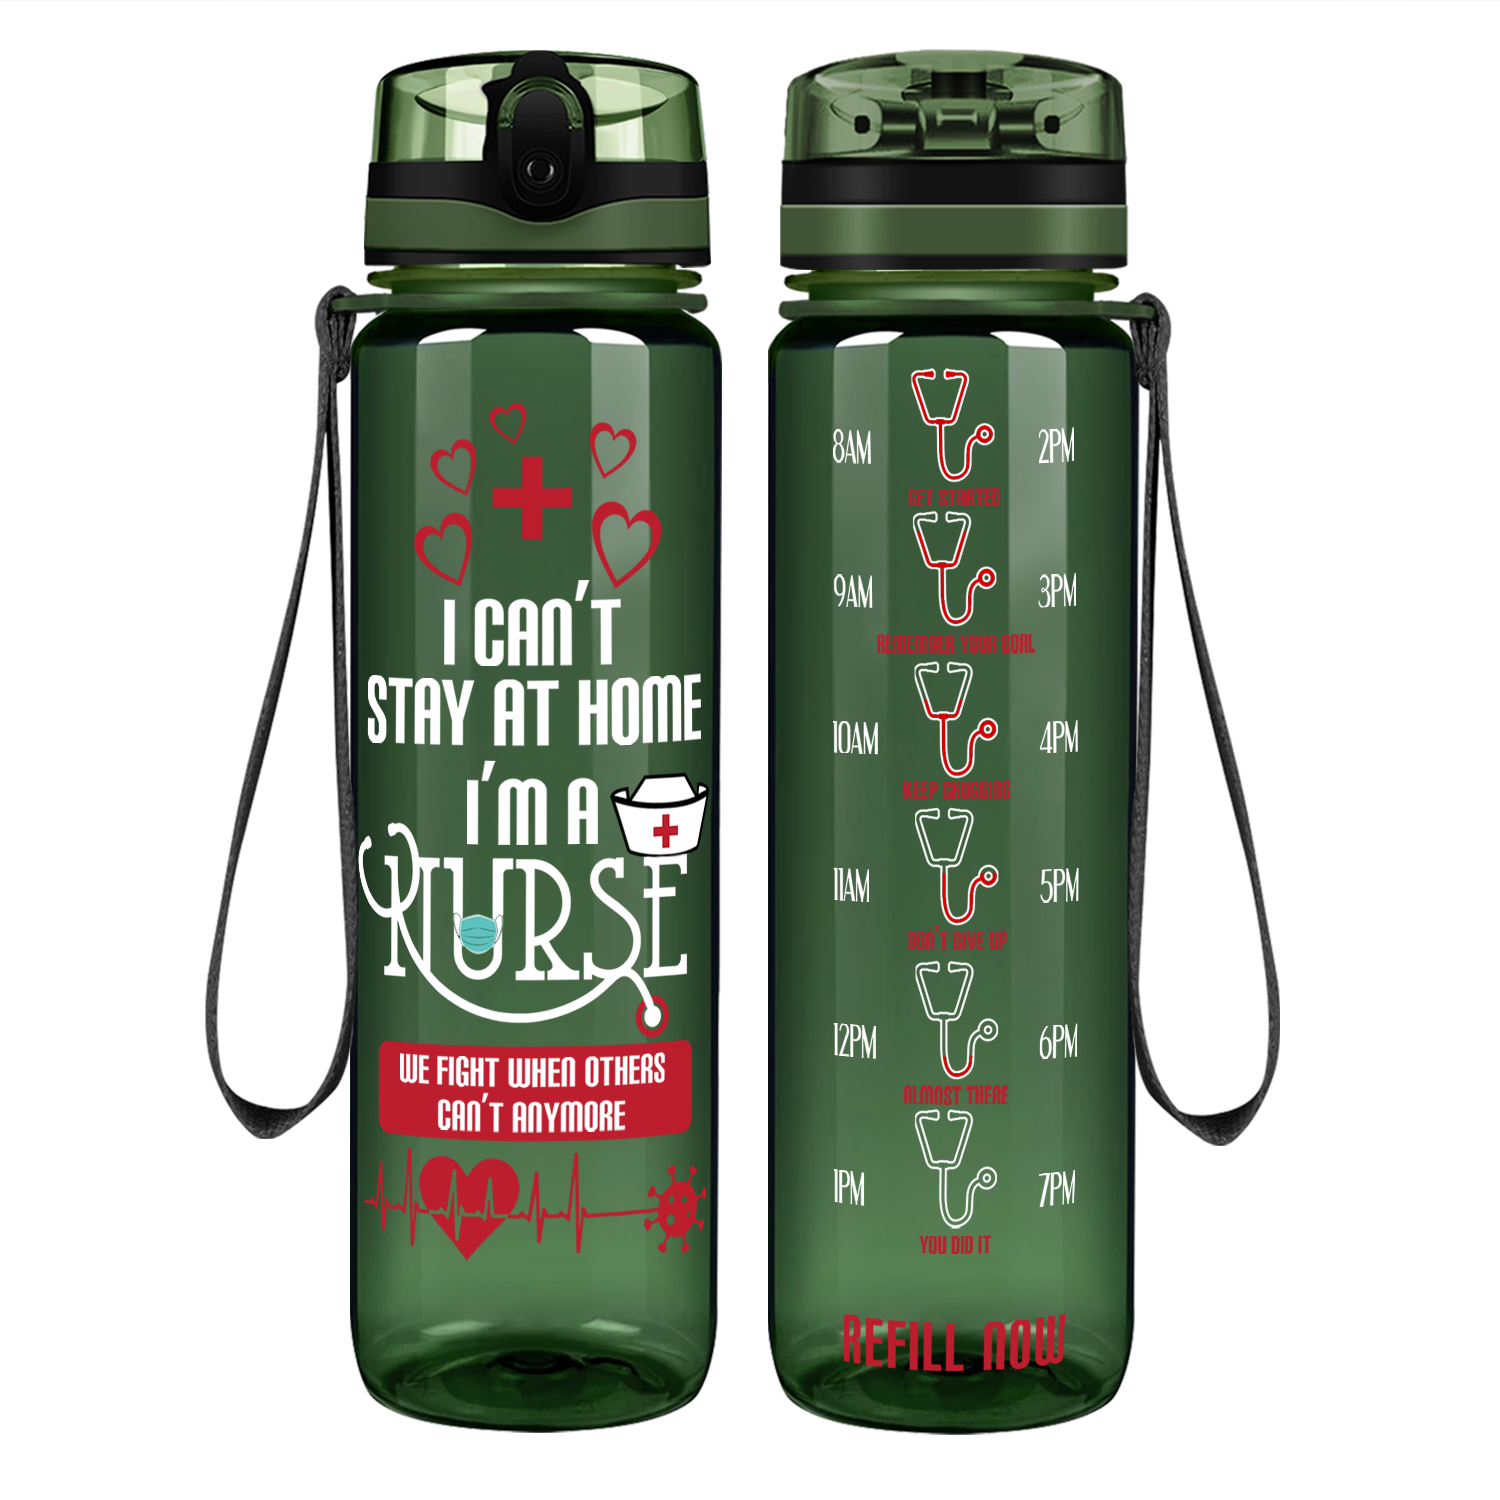 I Can't Stay at Home I'm a Nurse on 32oz Motivational Tracking Water Bottle